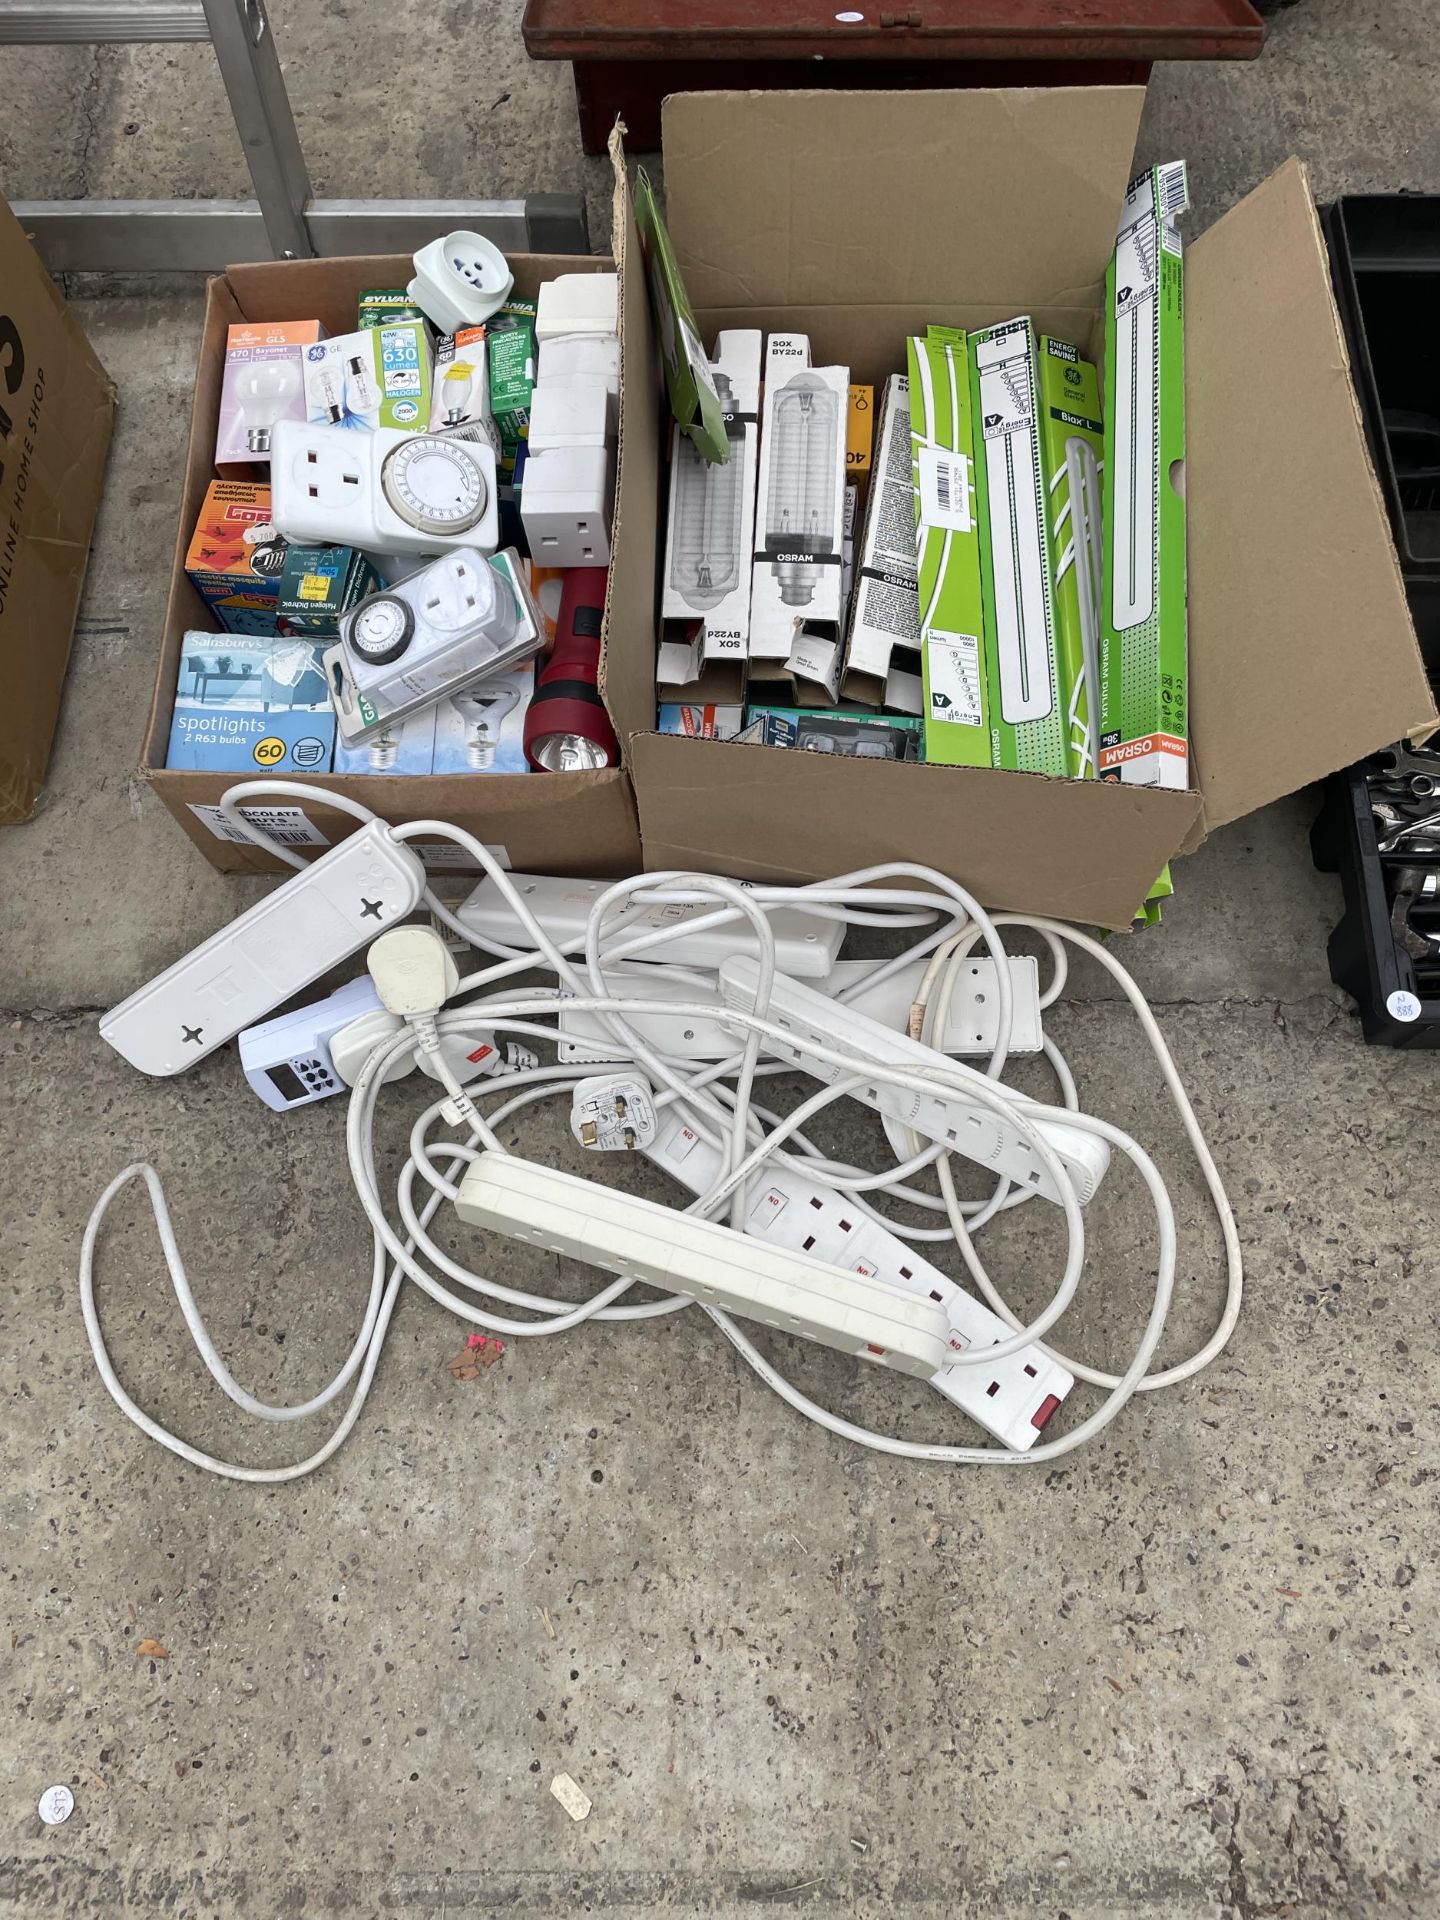 TWO BOXES OF AS NEW LIGHT BULBS AND A COLLECTION OF EXTENSION CABLES